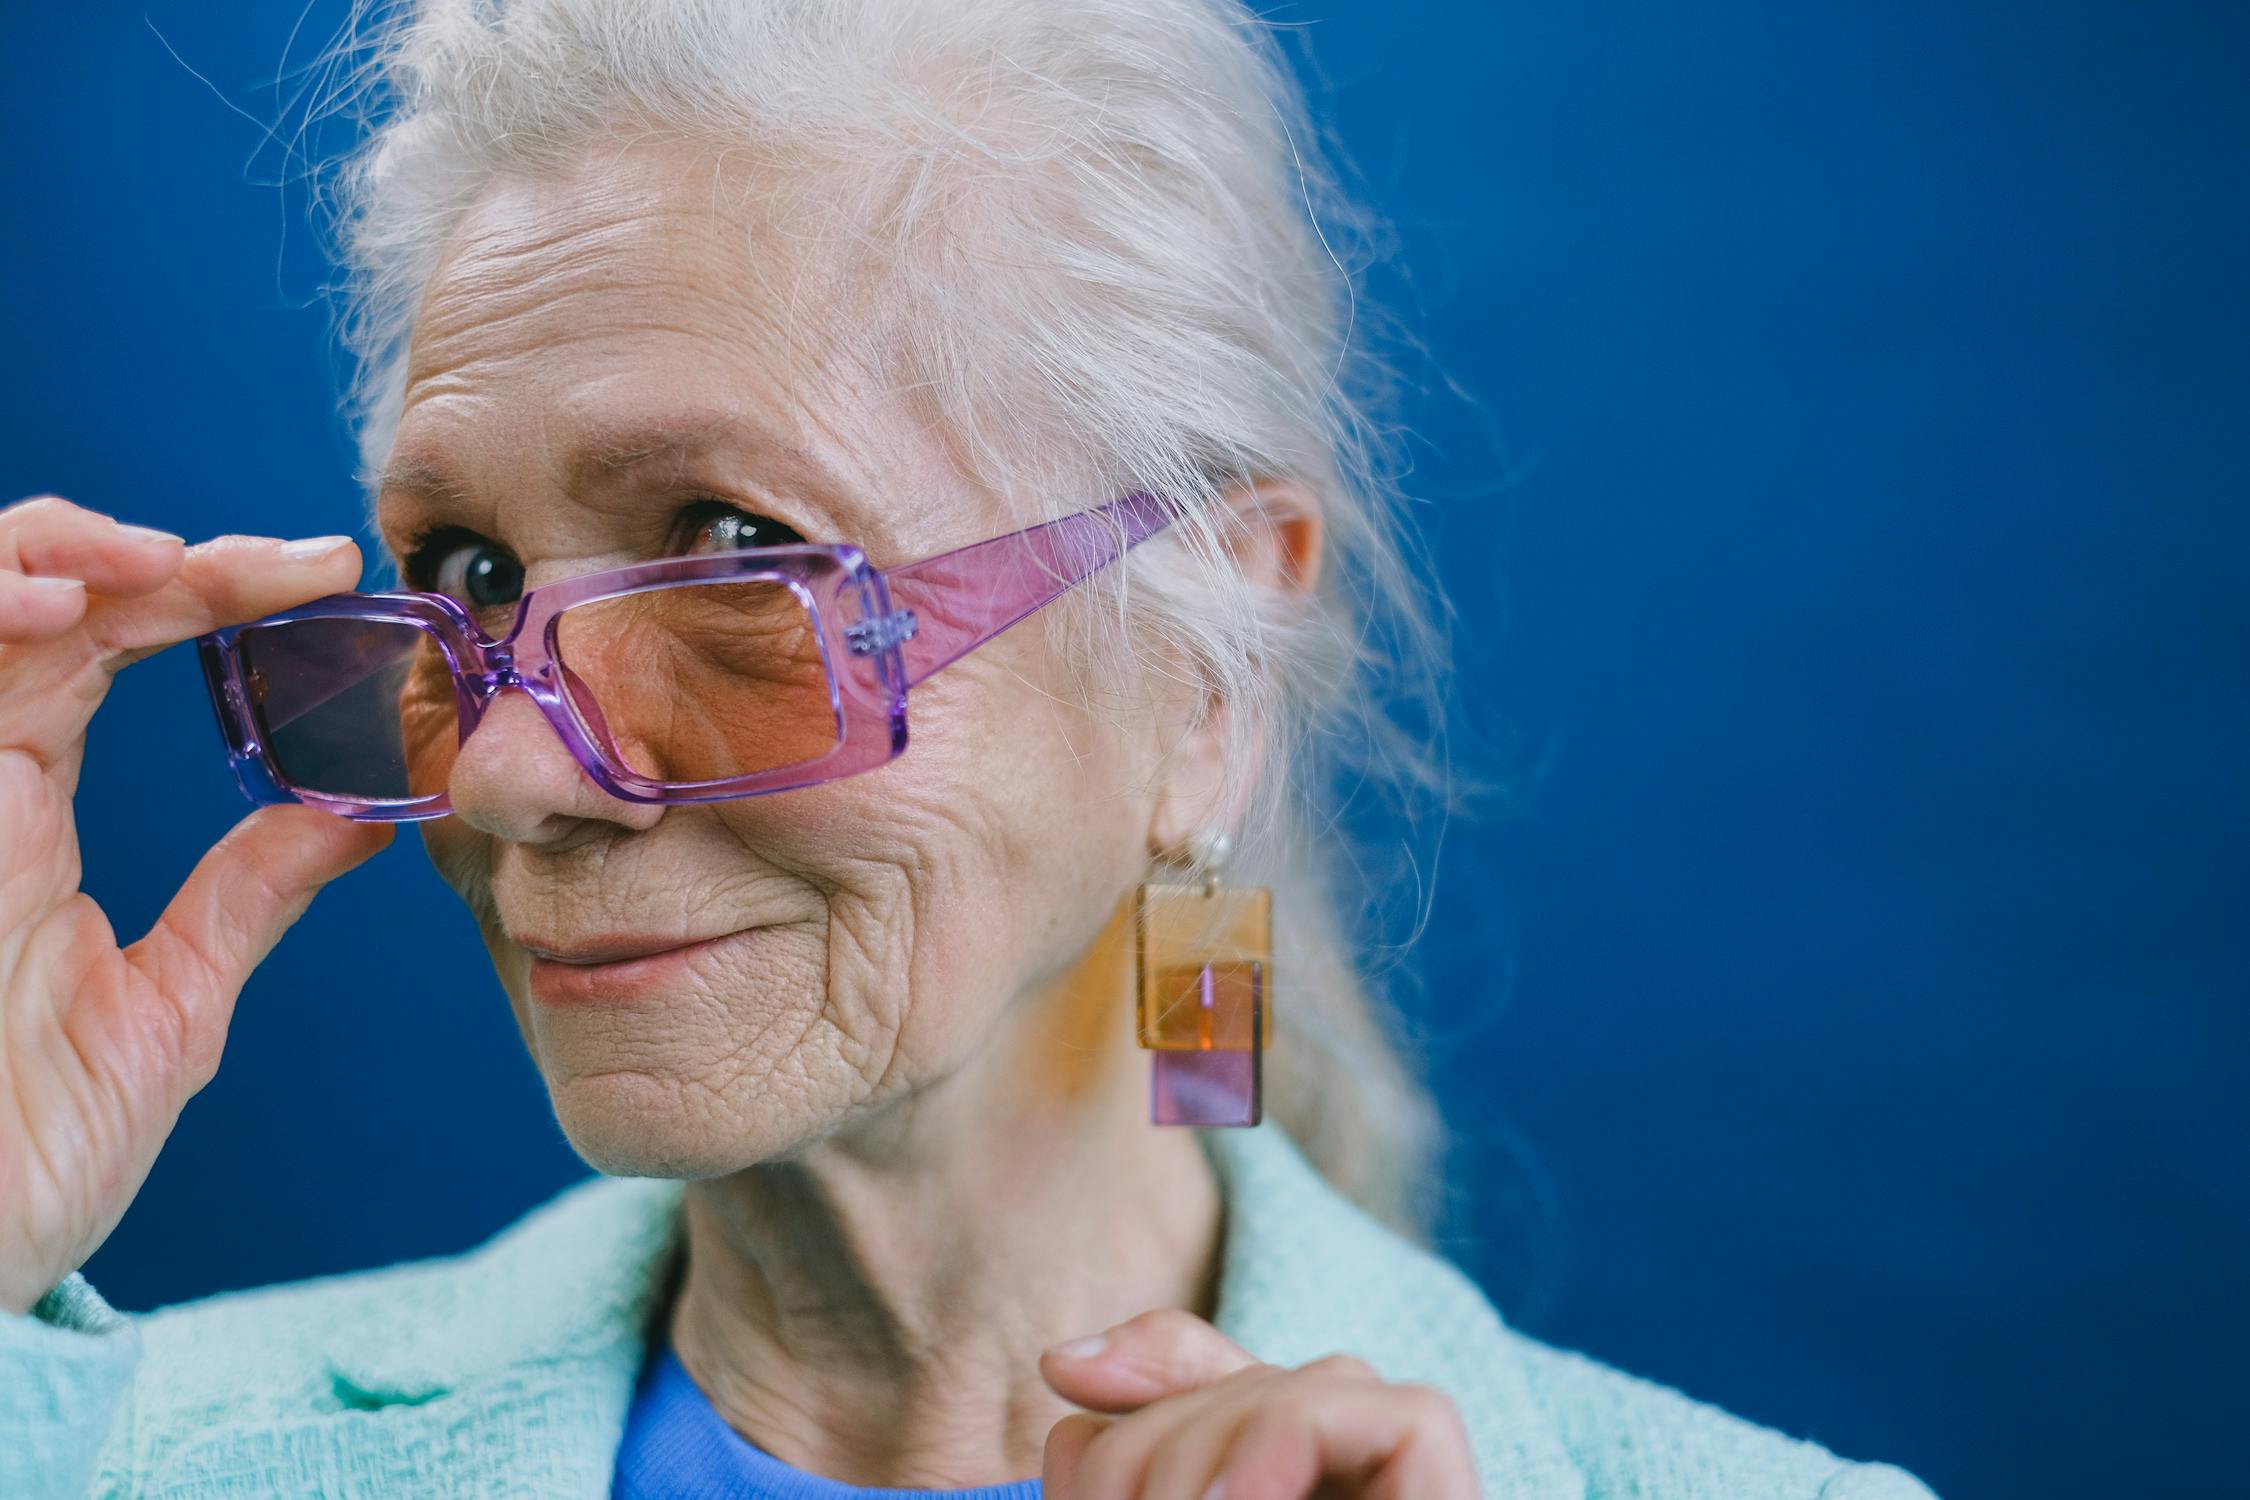 Old Lady Photo by SHVETS production from Pexels: https://www.pexels.com/photo/senior-woman-in-eyeglasses-and-earrings-7544692/